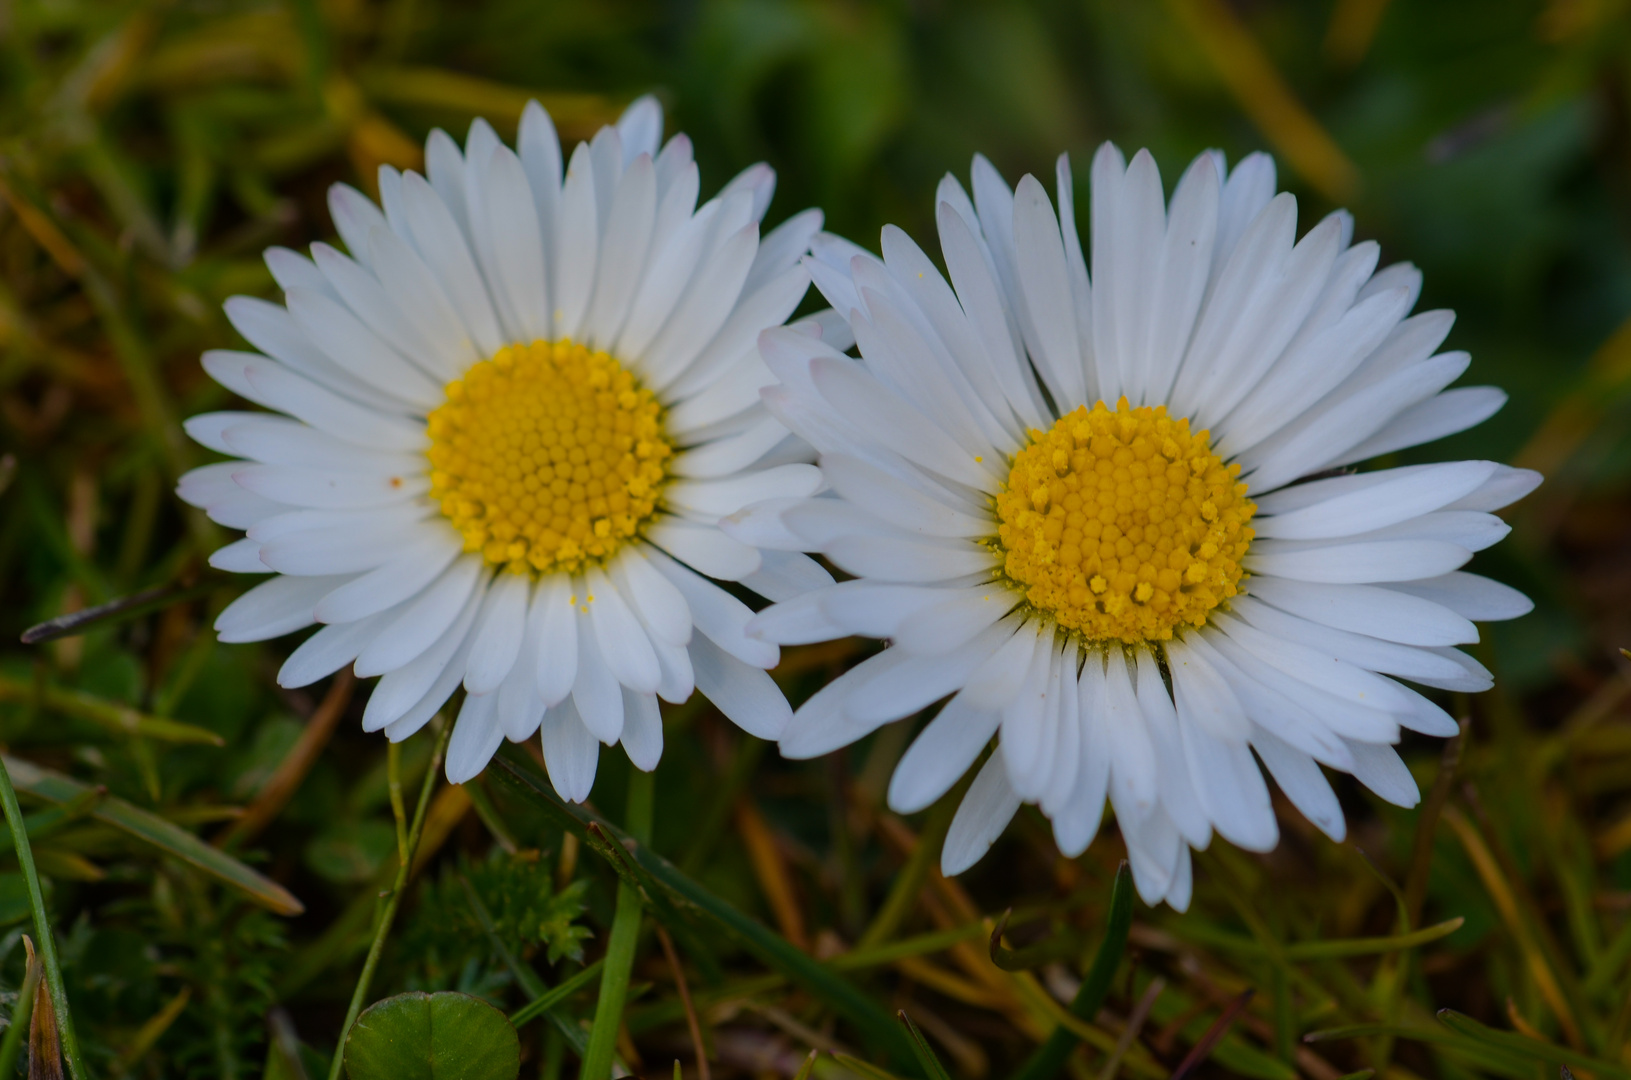 The two Daisys